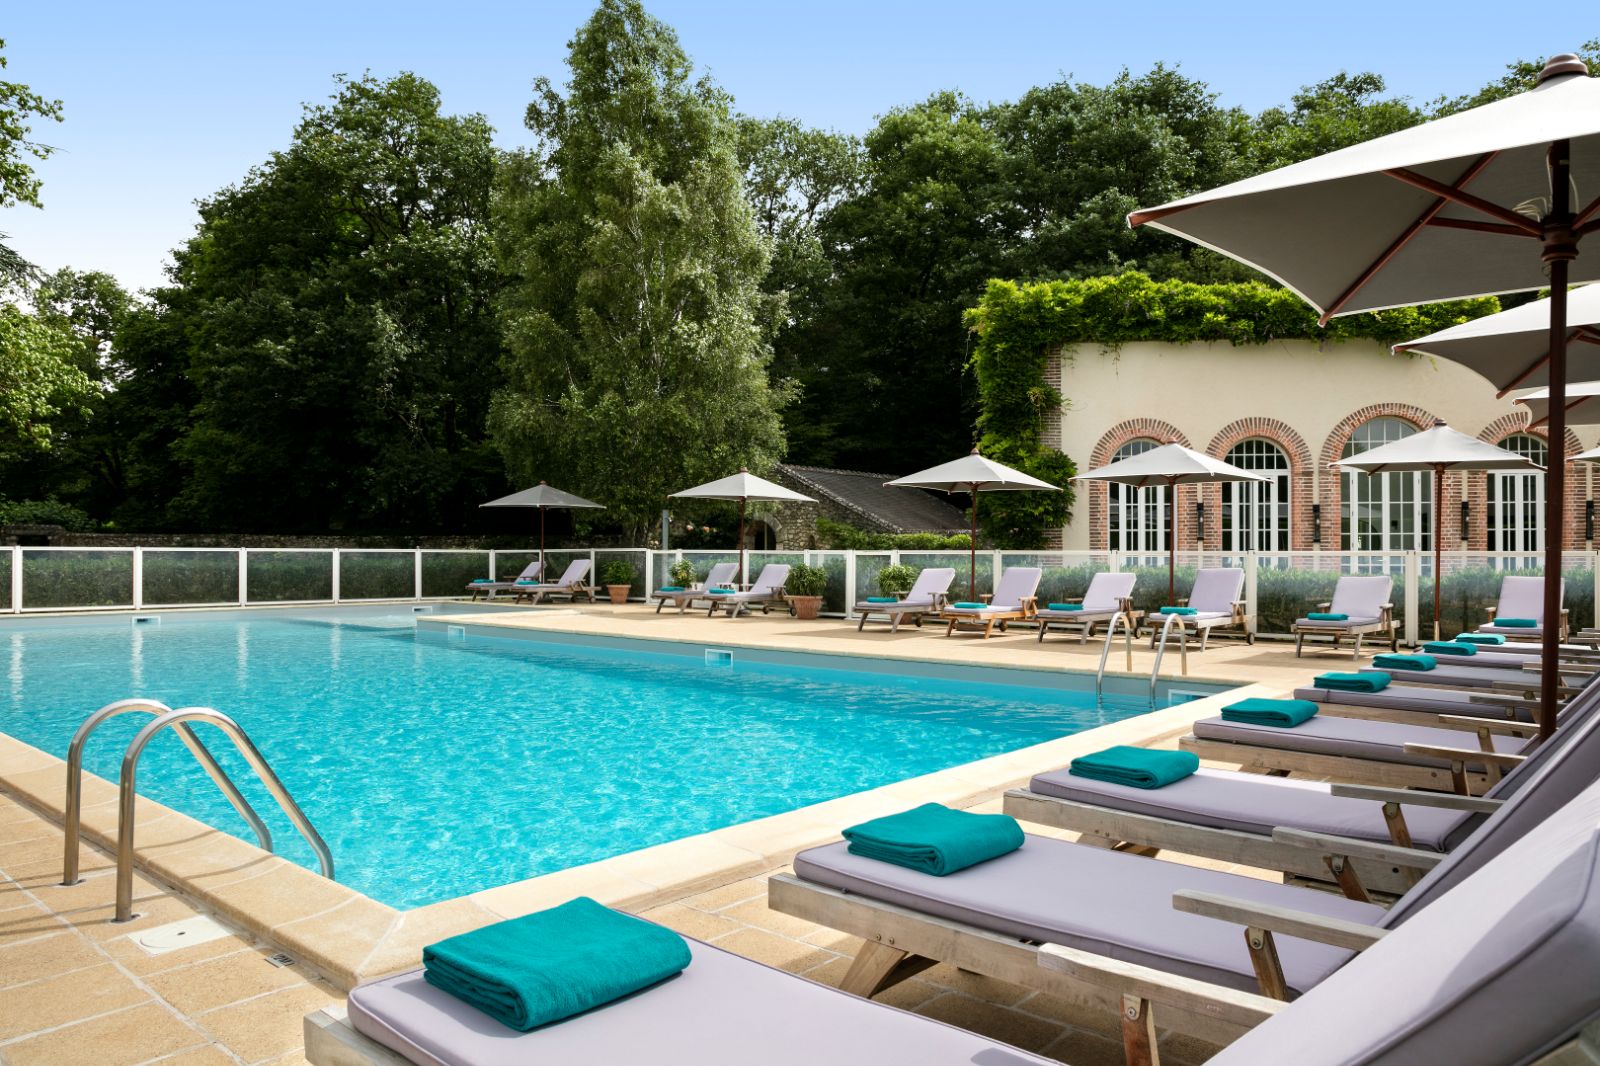 Poolside and sunbeds at Les Hauts de Loire in the Loire Valley, France